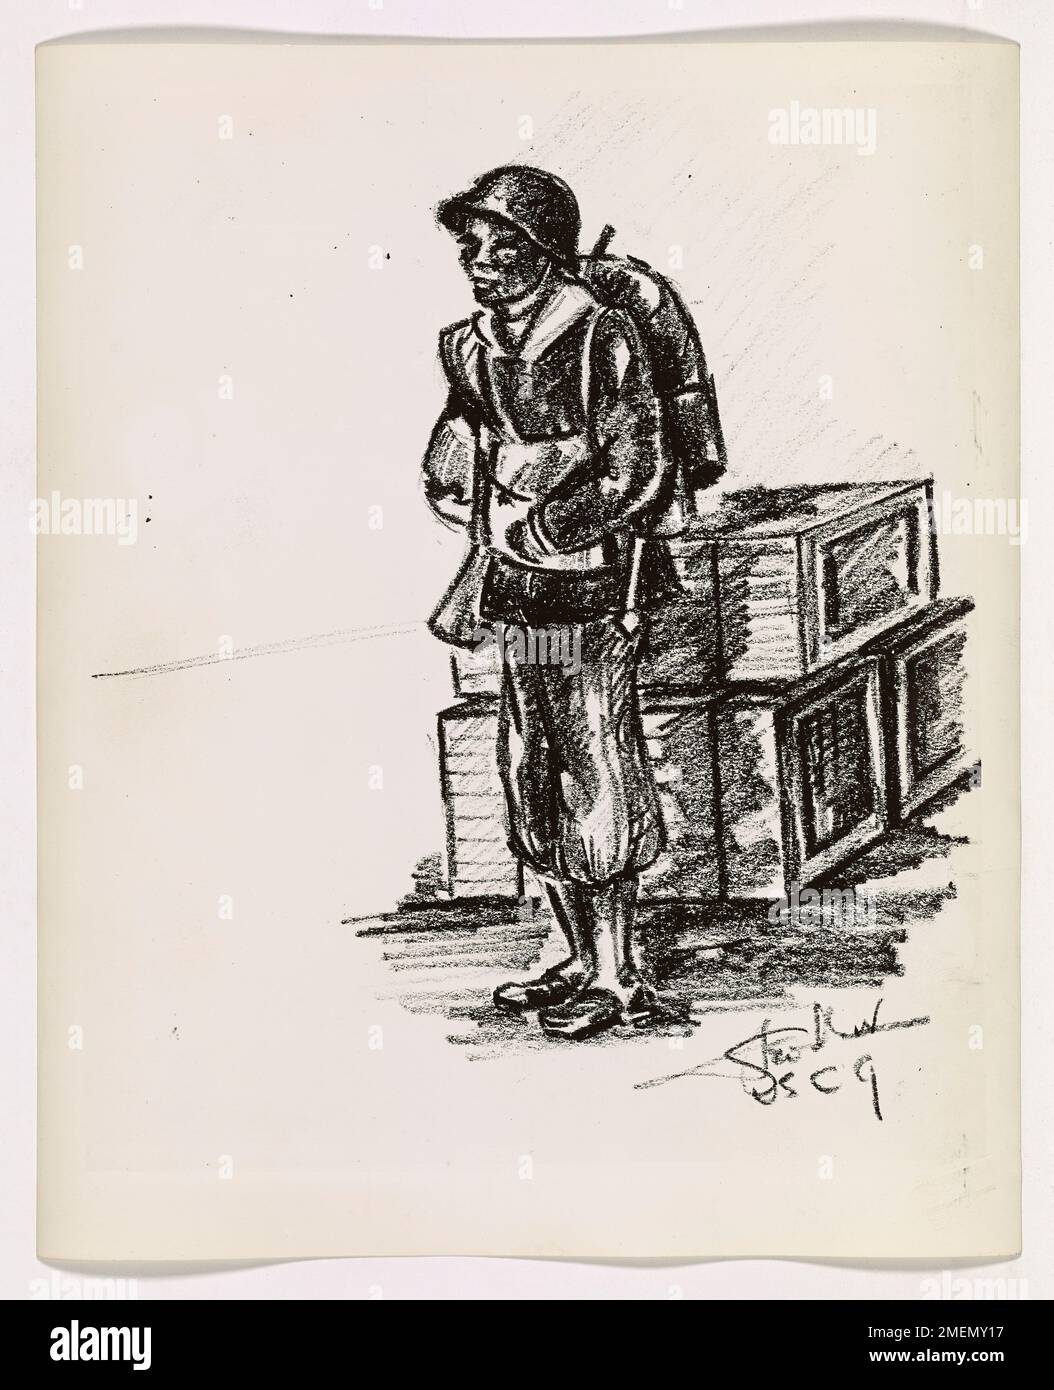 G.I. Joe Is Homesick. This image depicts artwork of a homesick soldier, drawn by Coast Guard Combat Artist George Hodgson Heidler. Stock Photo